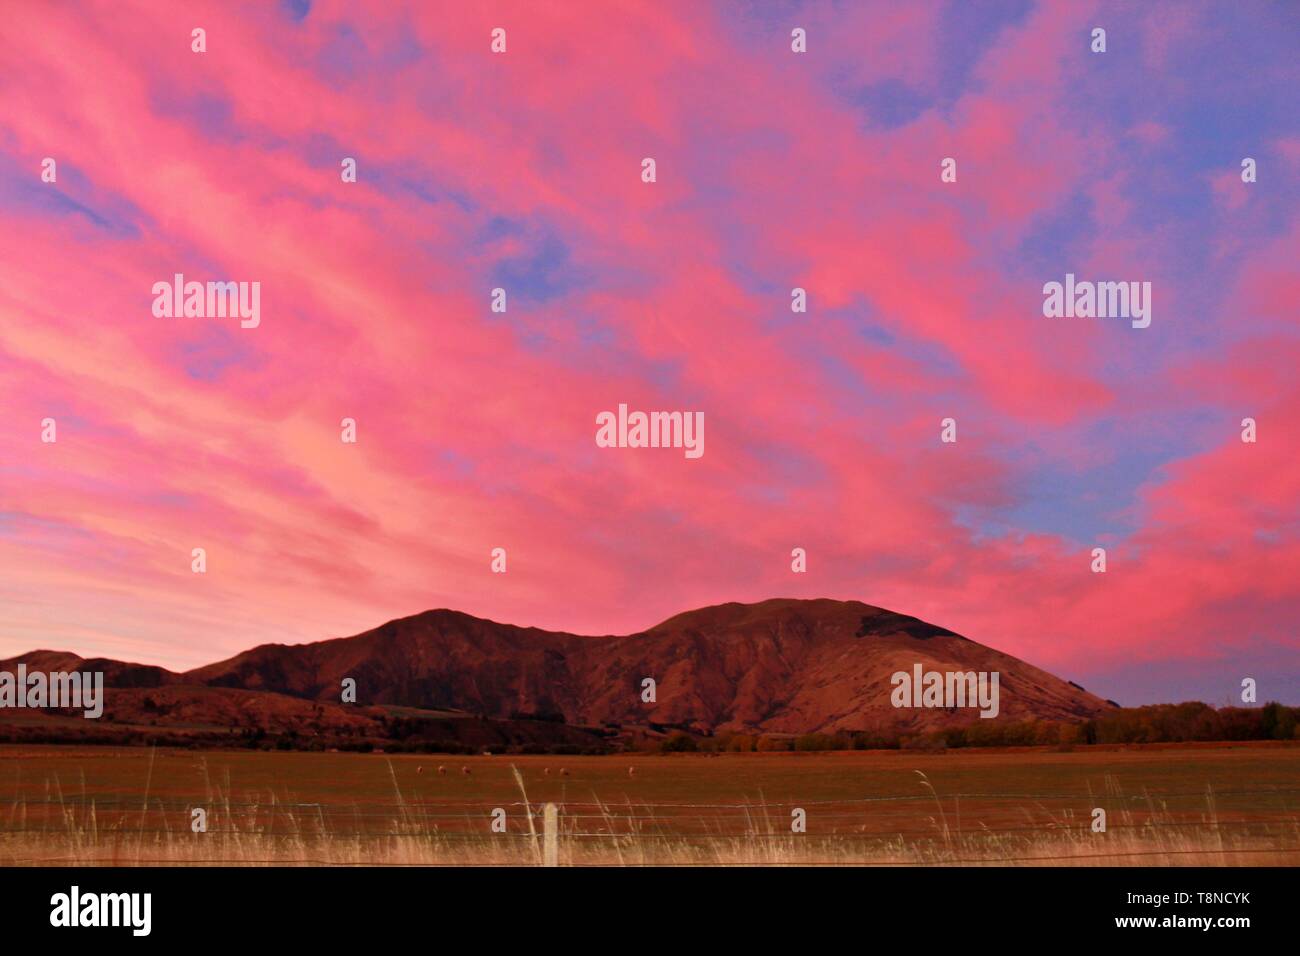 A pinky evening soaked in sunset vibes in Queenstown, New Zealand. A perfect background for motivational, inspiration quotes. Stock Photo